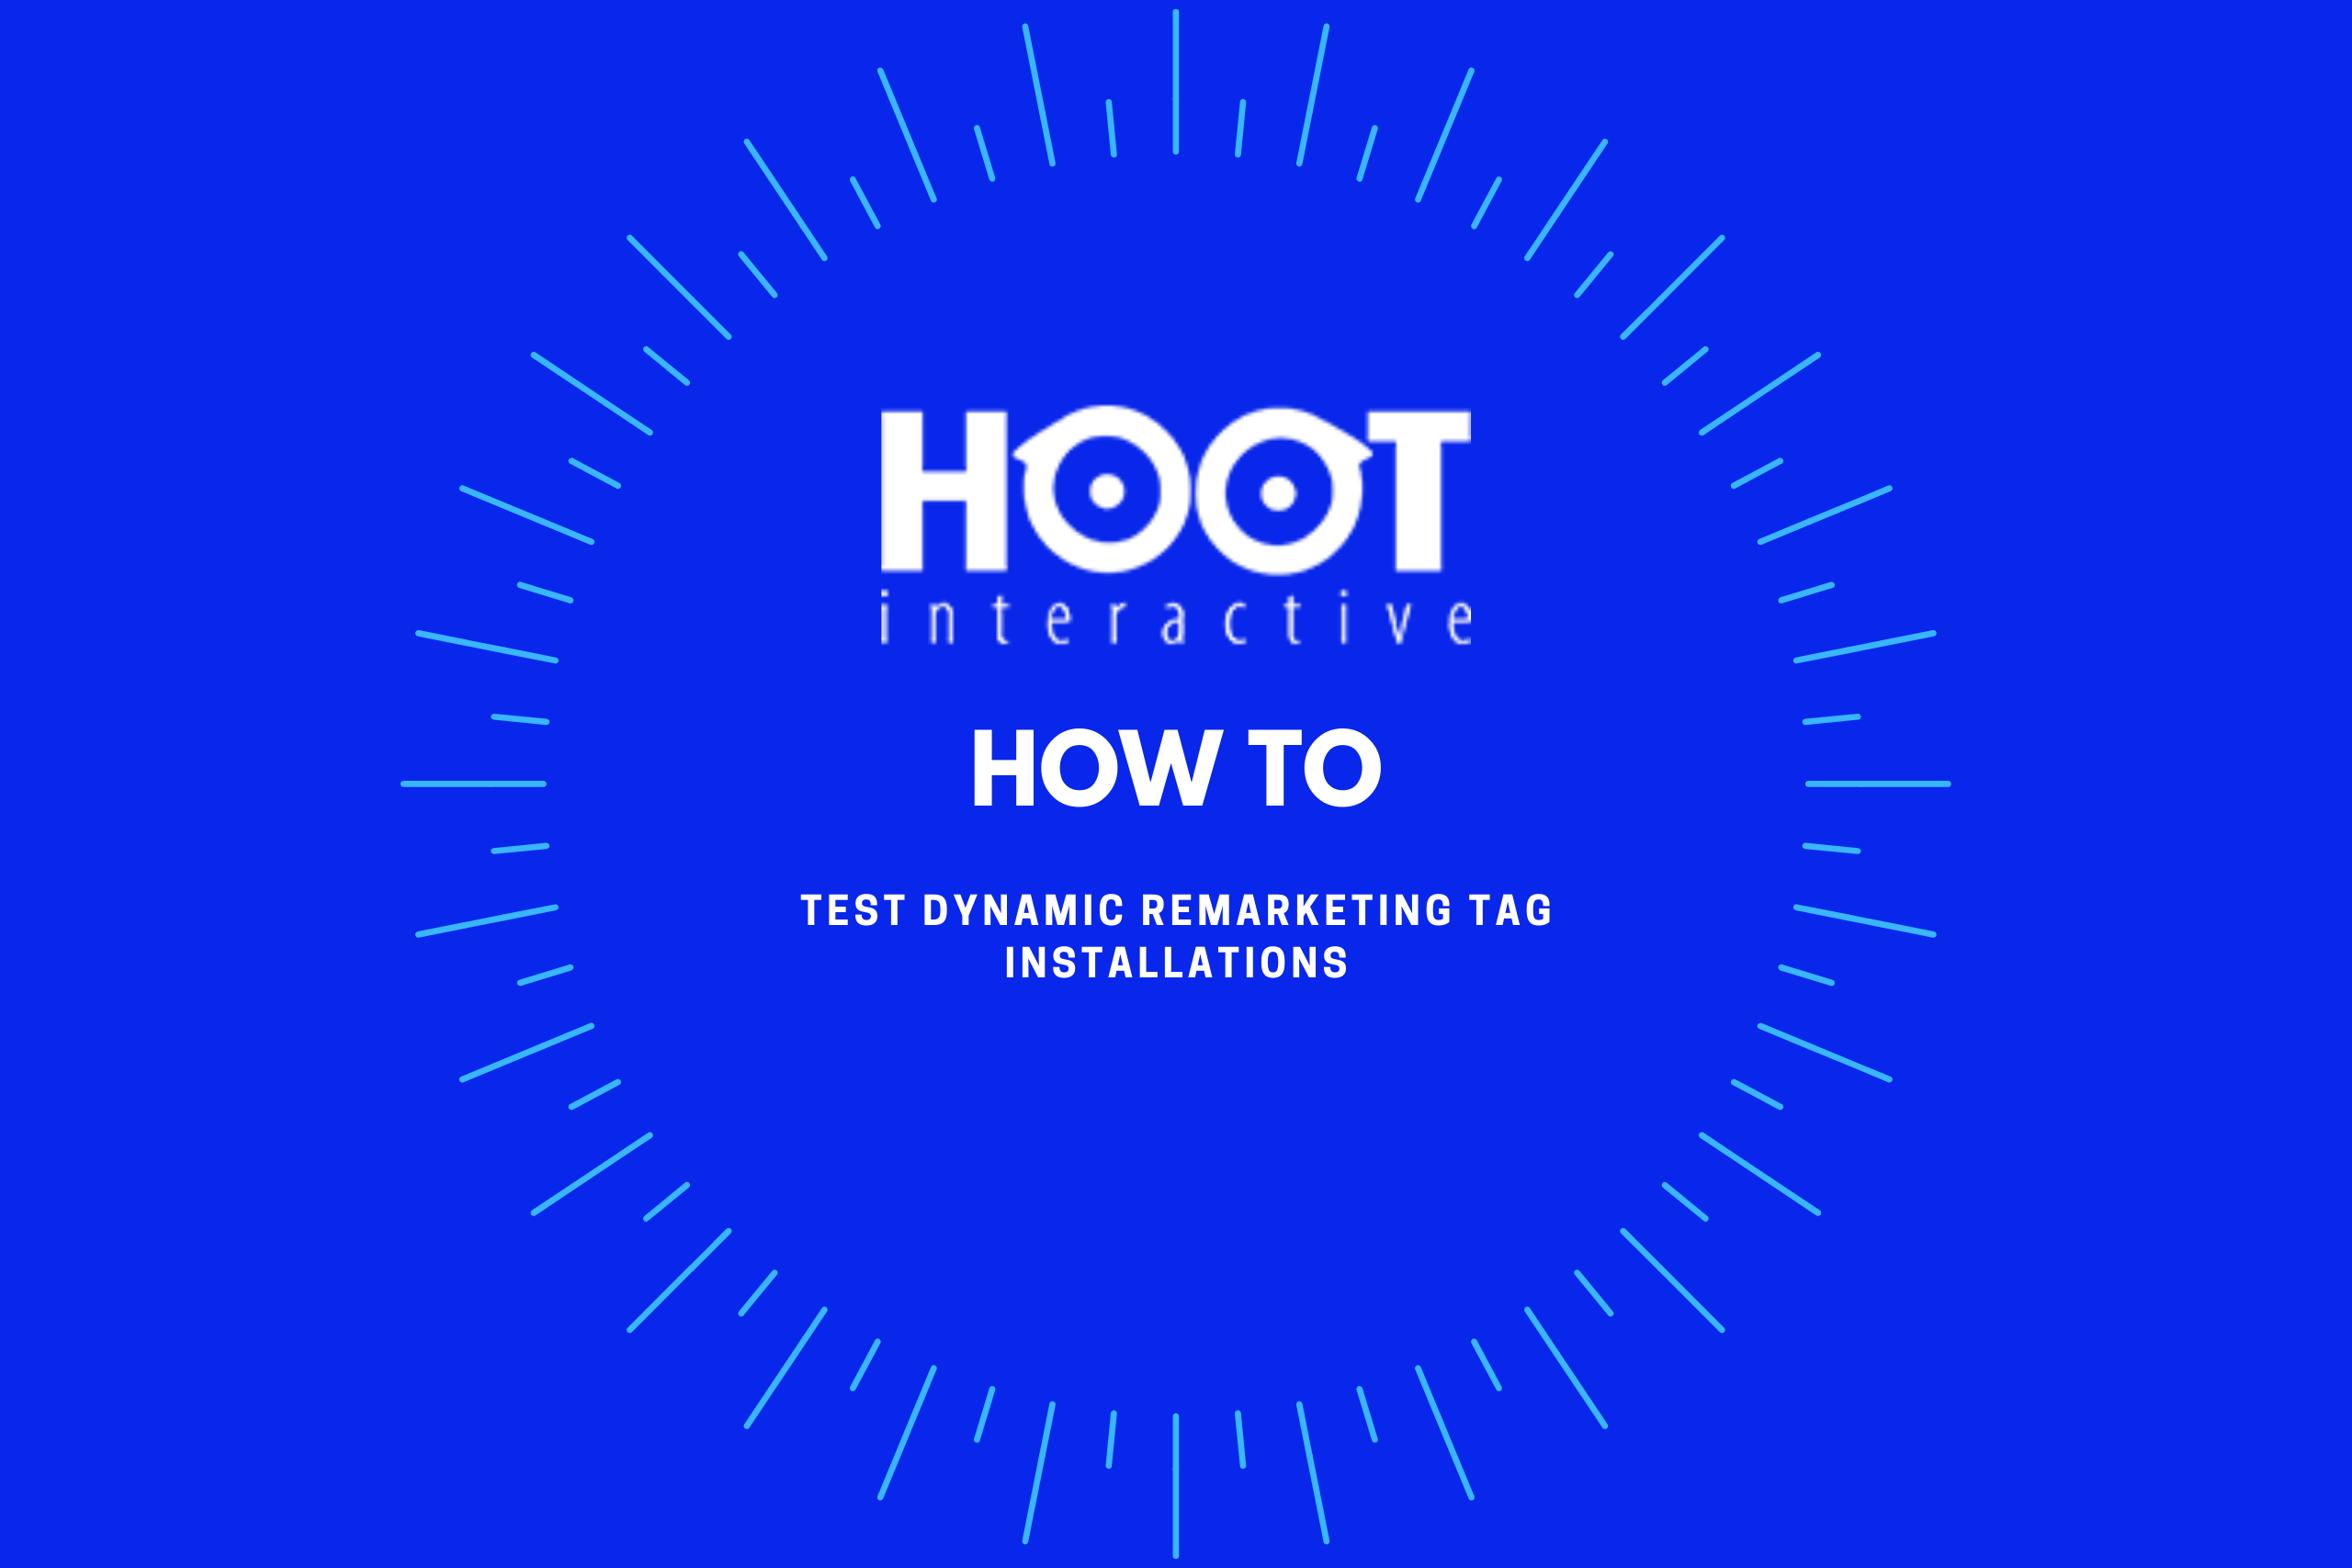 Hoot How To: Test Dynamic Remarketing Tag Installations